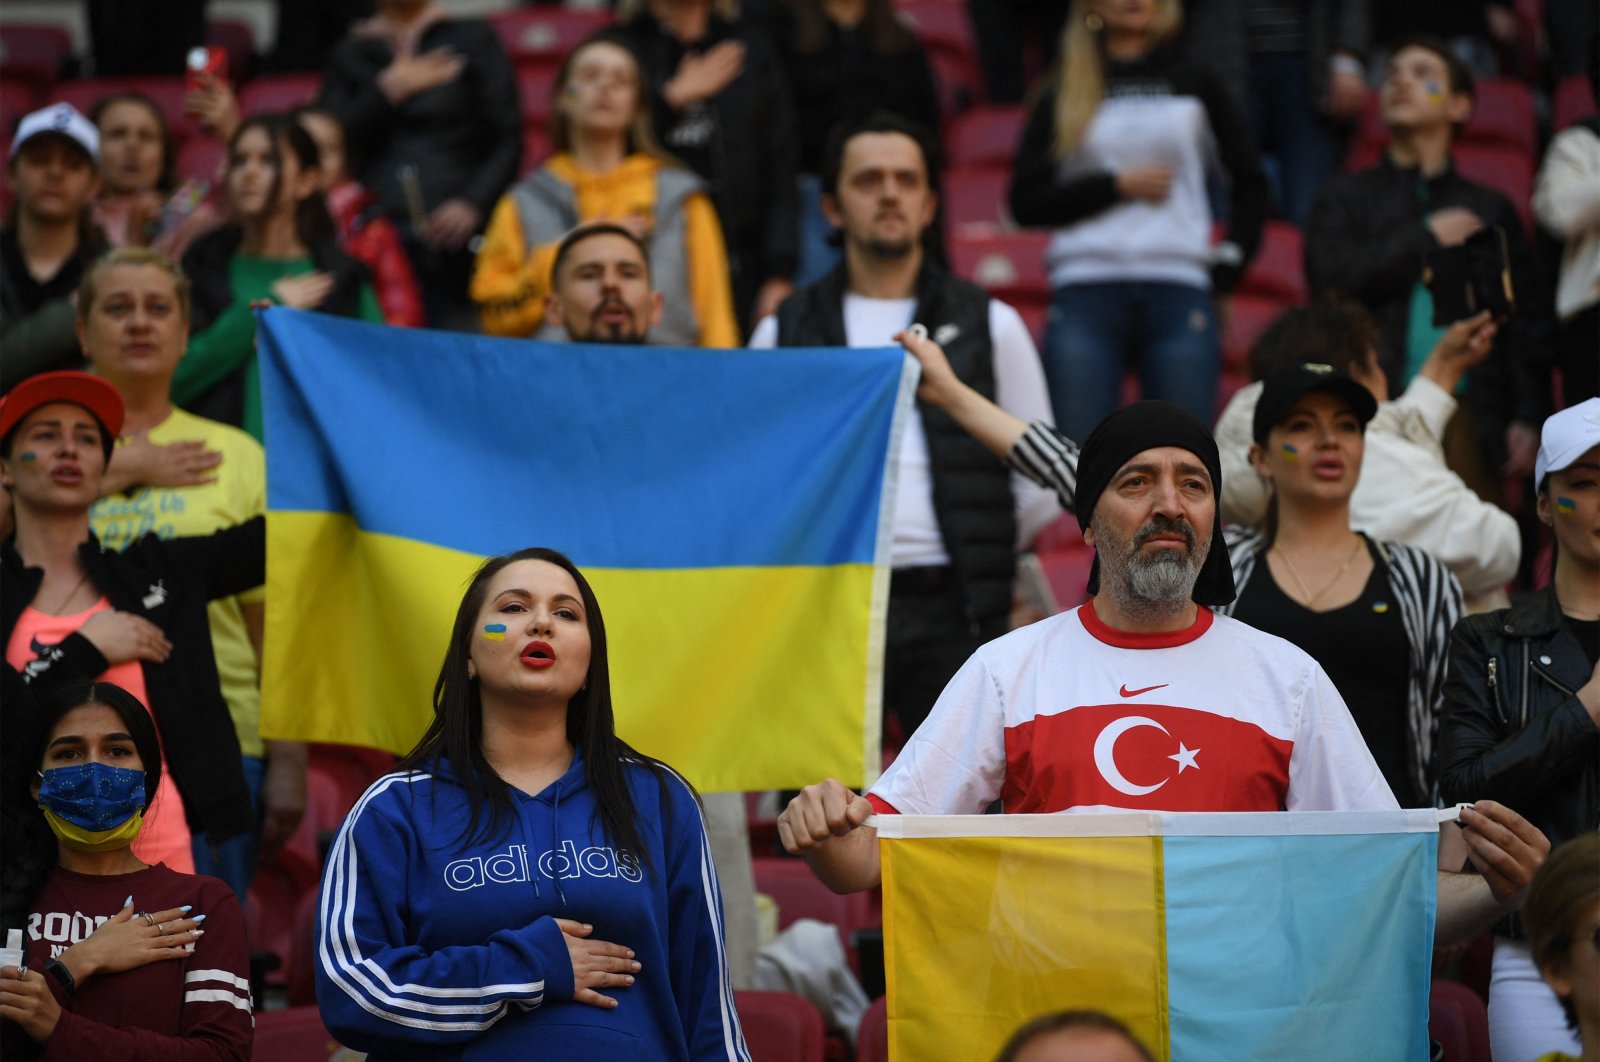 Supporters listen to national anthems with flags of Ukraine during the ceremony before a friendly charity football match between Galatasaray and Dinamo Kyiv held for peace and to raise money for Ukrainian refugees, at the NEF Stadium in Istanbul, on April 14, 2022. (AFP Photo)